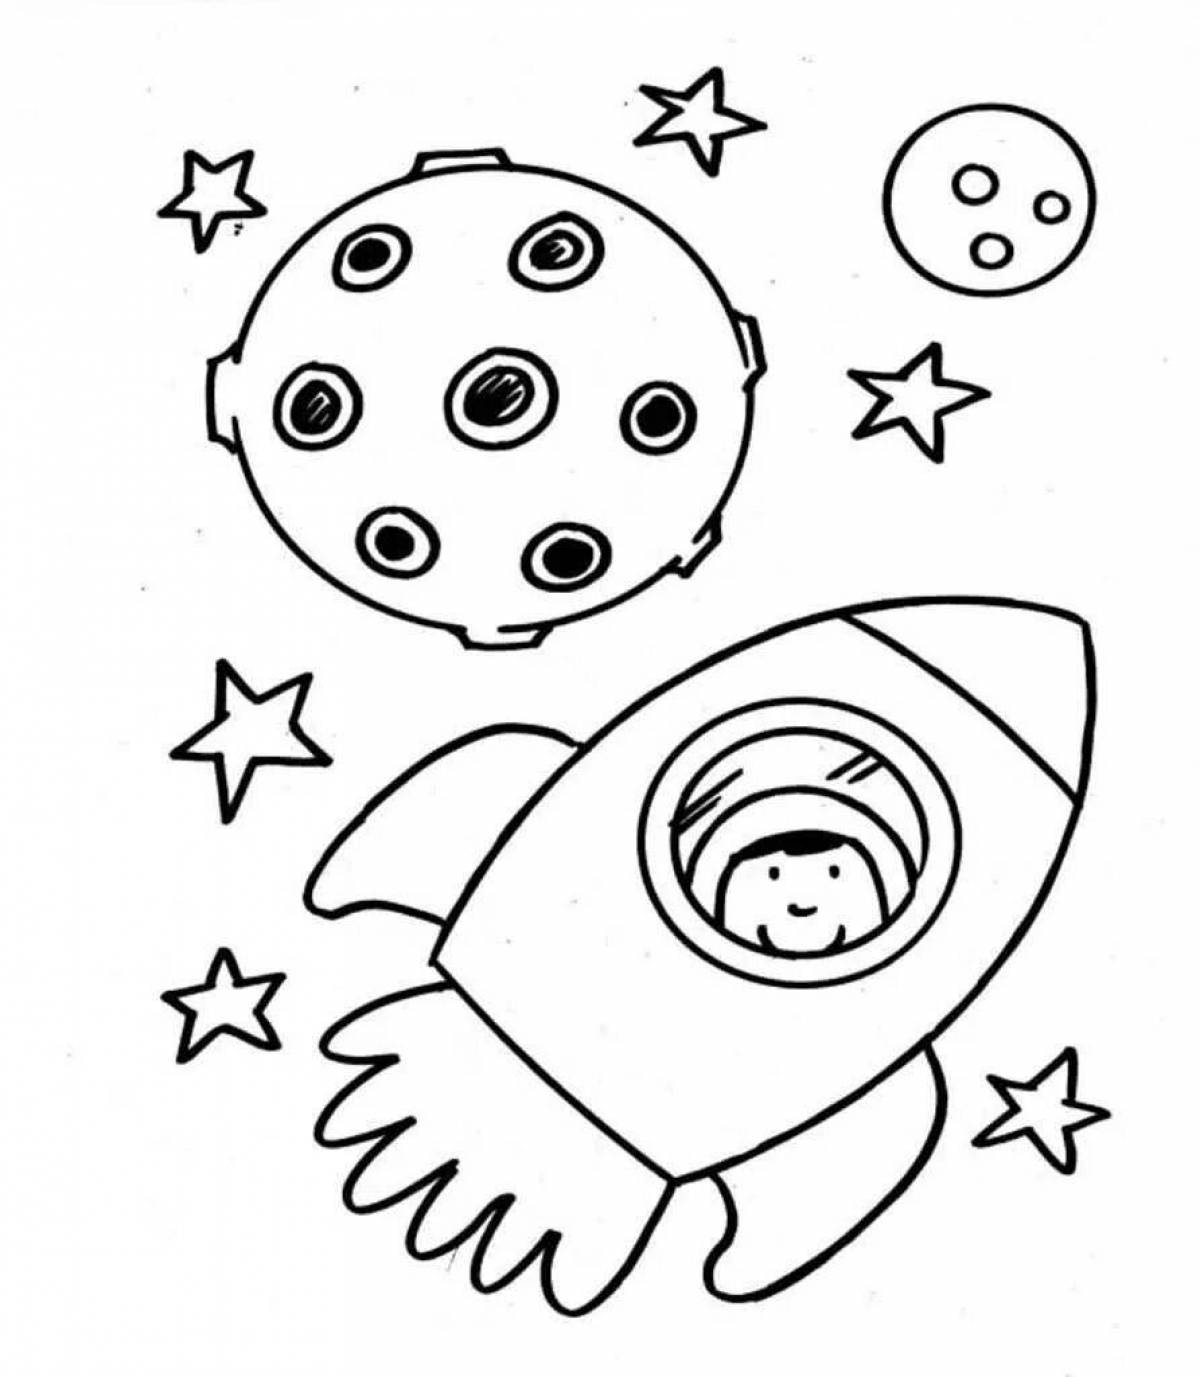 Inspiring space coloring book for kids